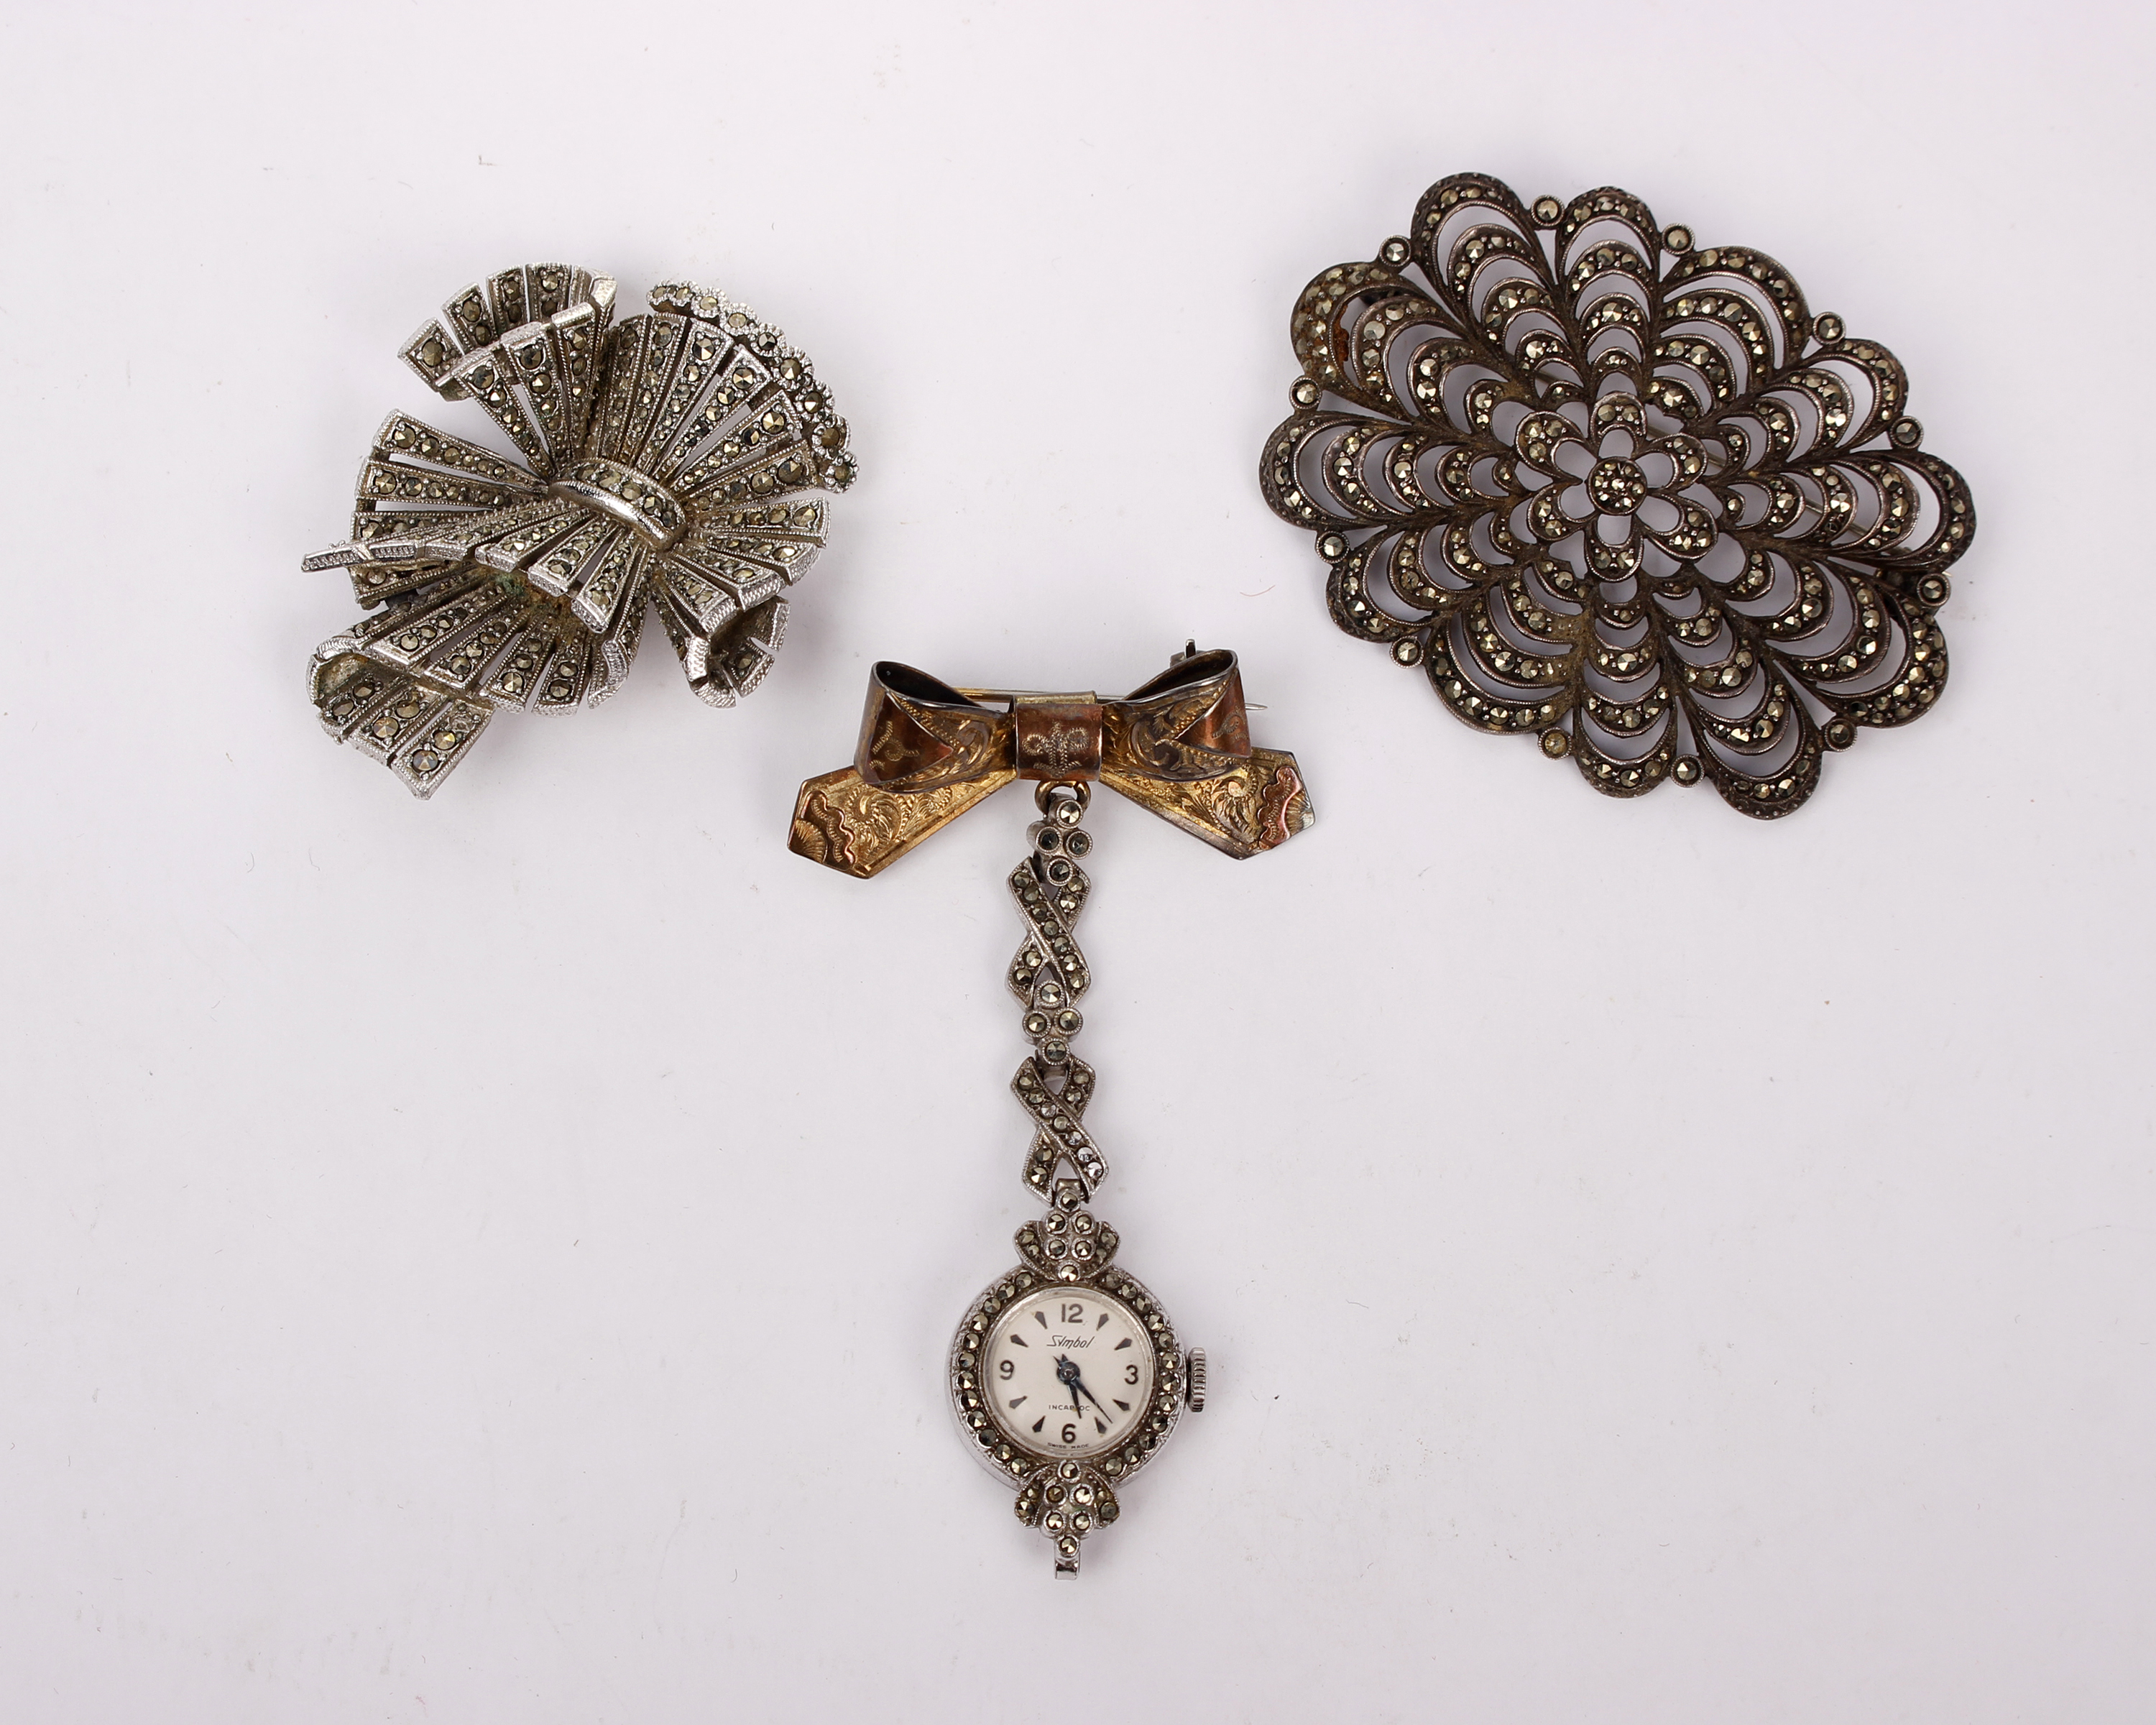 A marcasite lapel watch together with two pieces of Victorian marcasite jewellery.